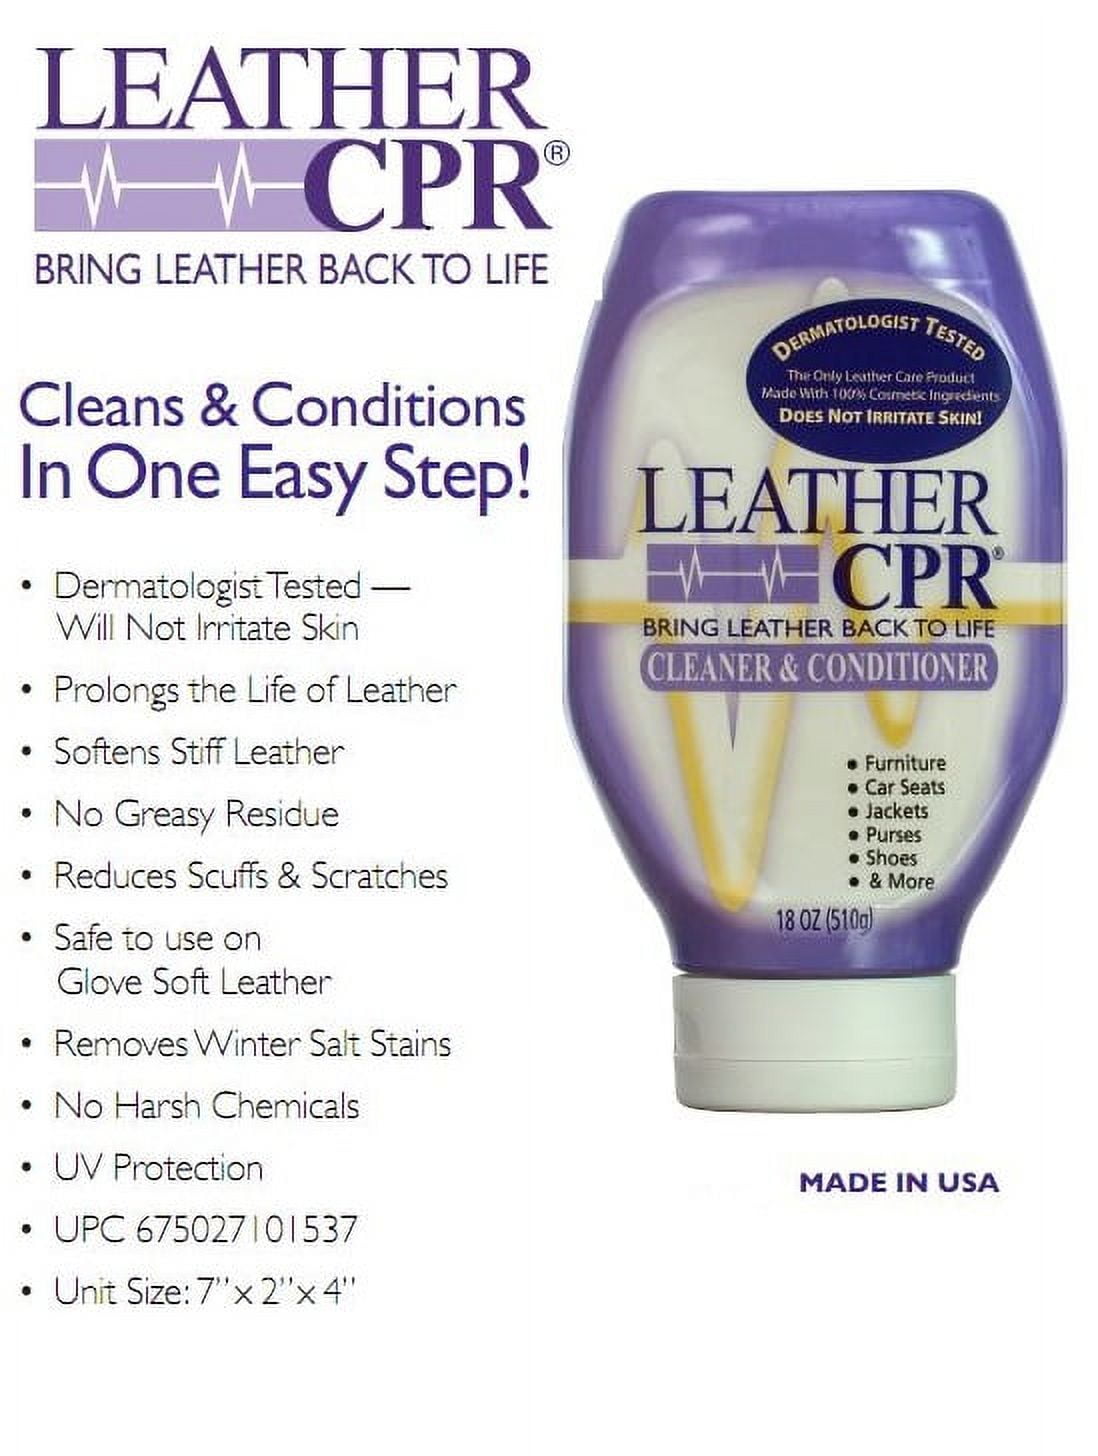 Leather CPR Cleaner & Conditioner Cream - China Leather Clearing